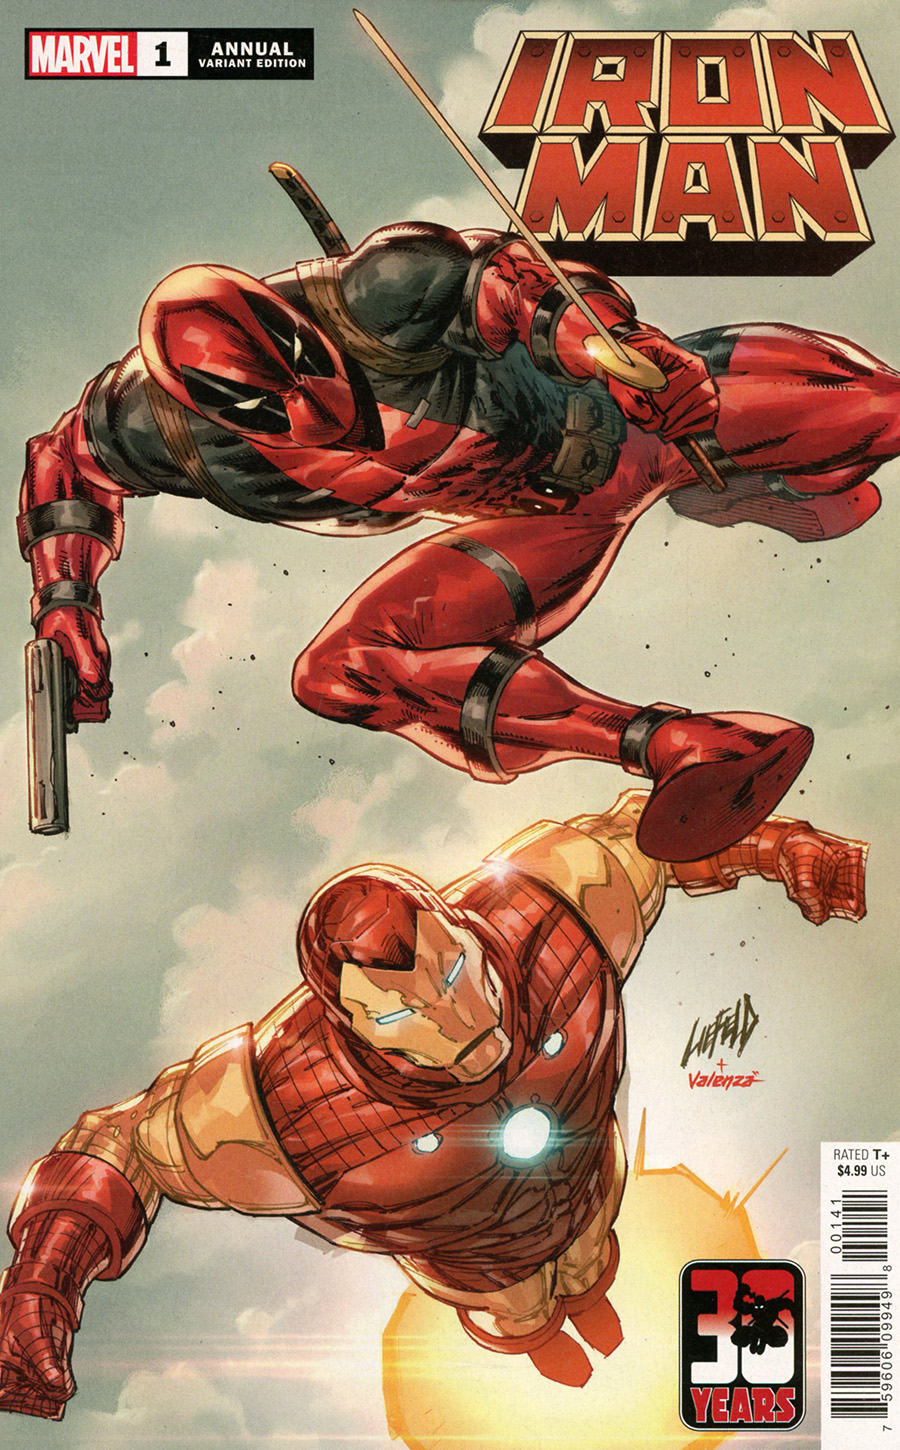 Iron Man Vol 6 Annual (2021) #1 Cover D Variant Rob Liefeld Deadpool 30th Anniversary Cover (Infinite Destinies Tie-In)